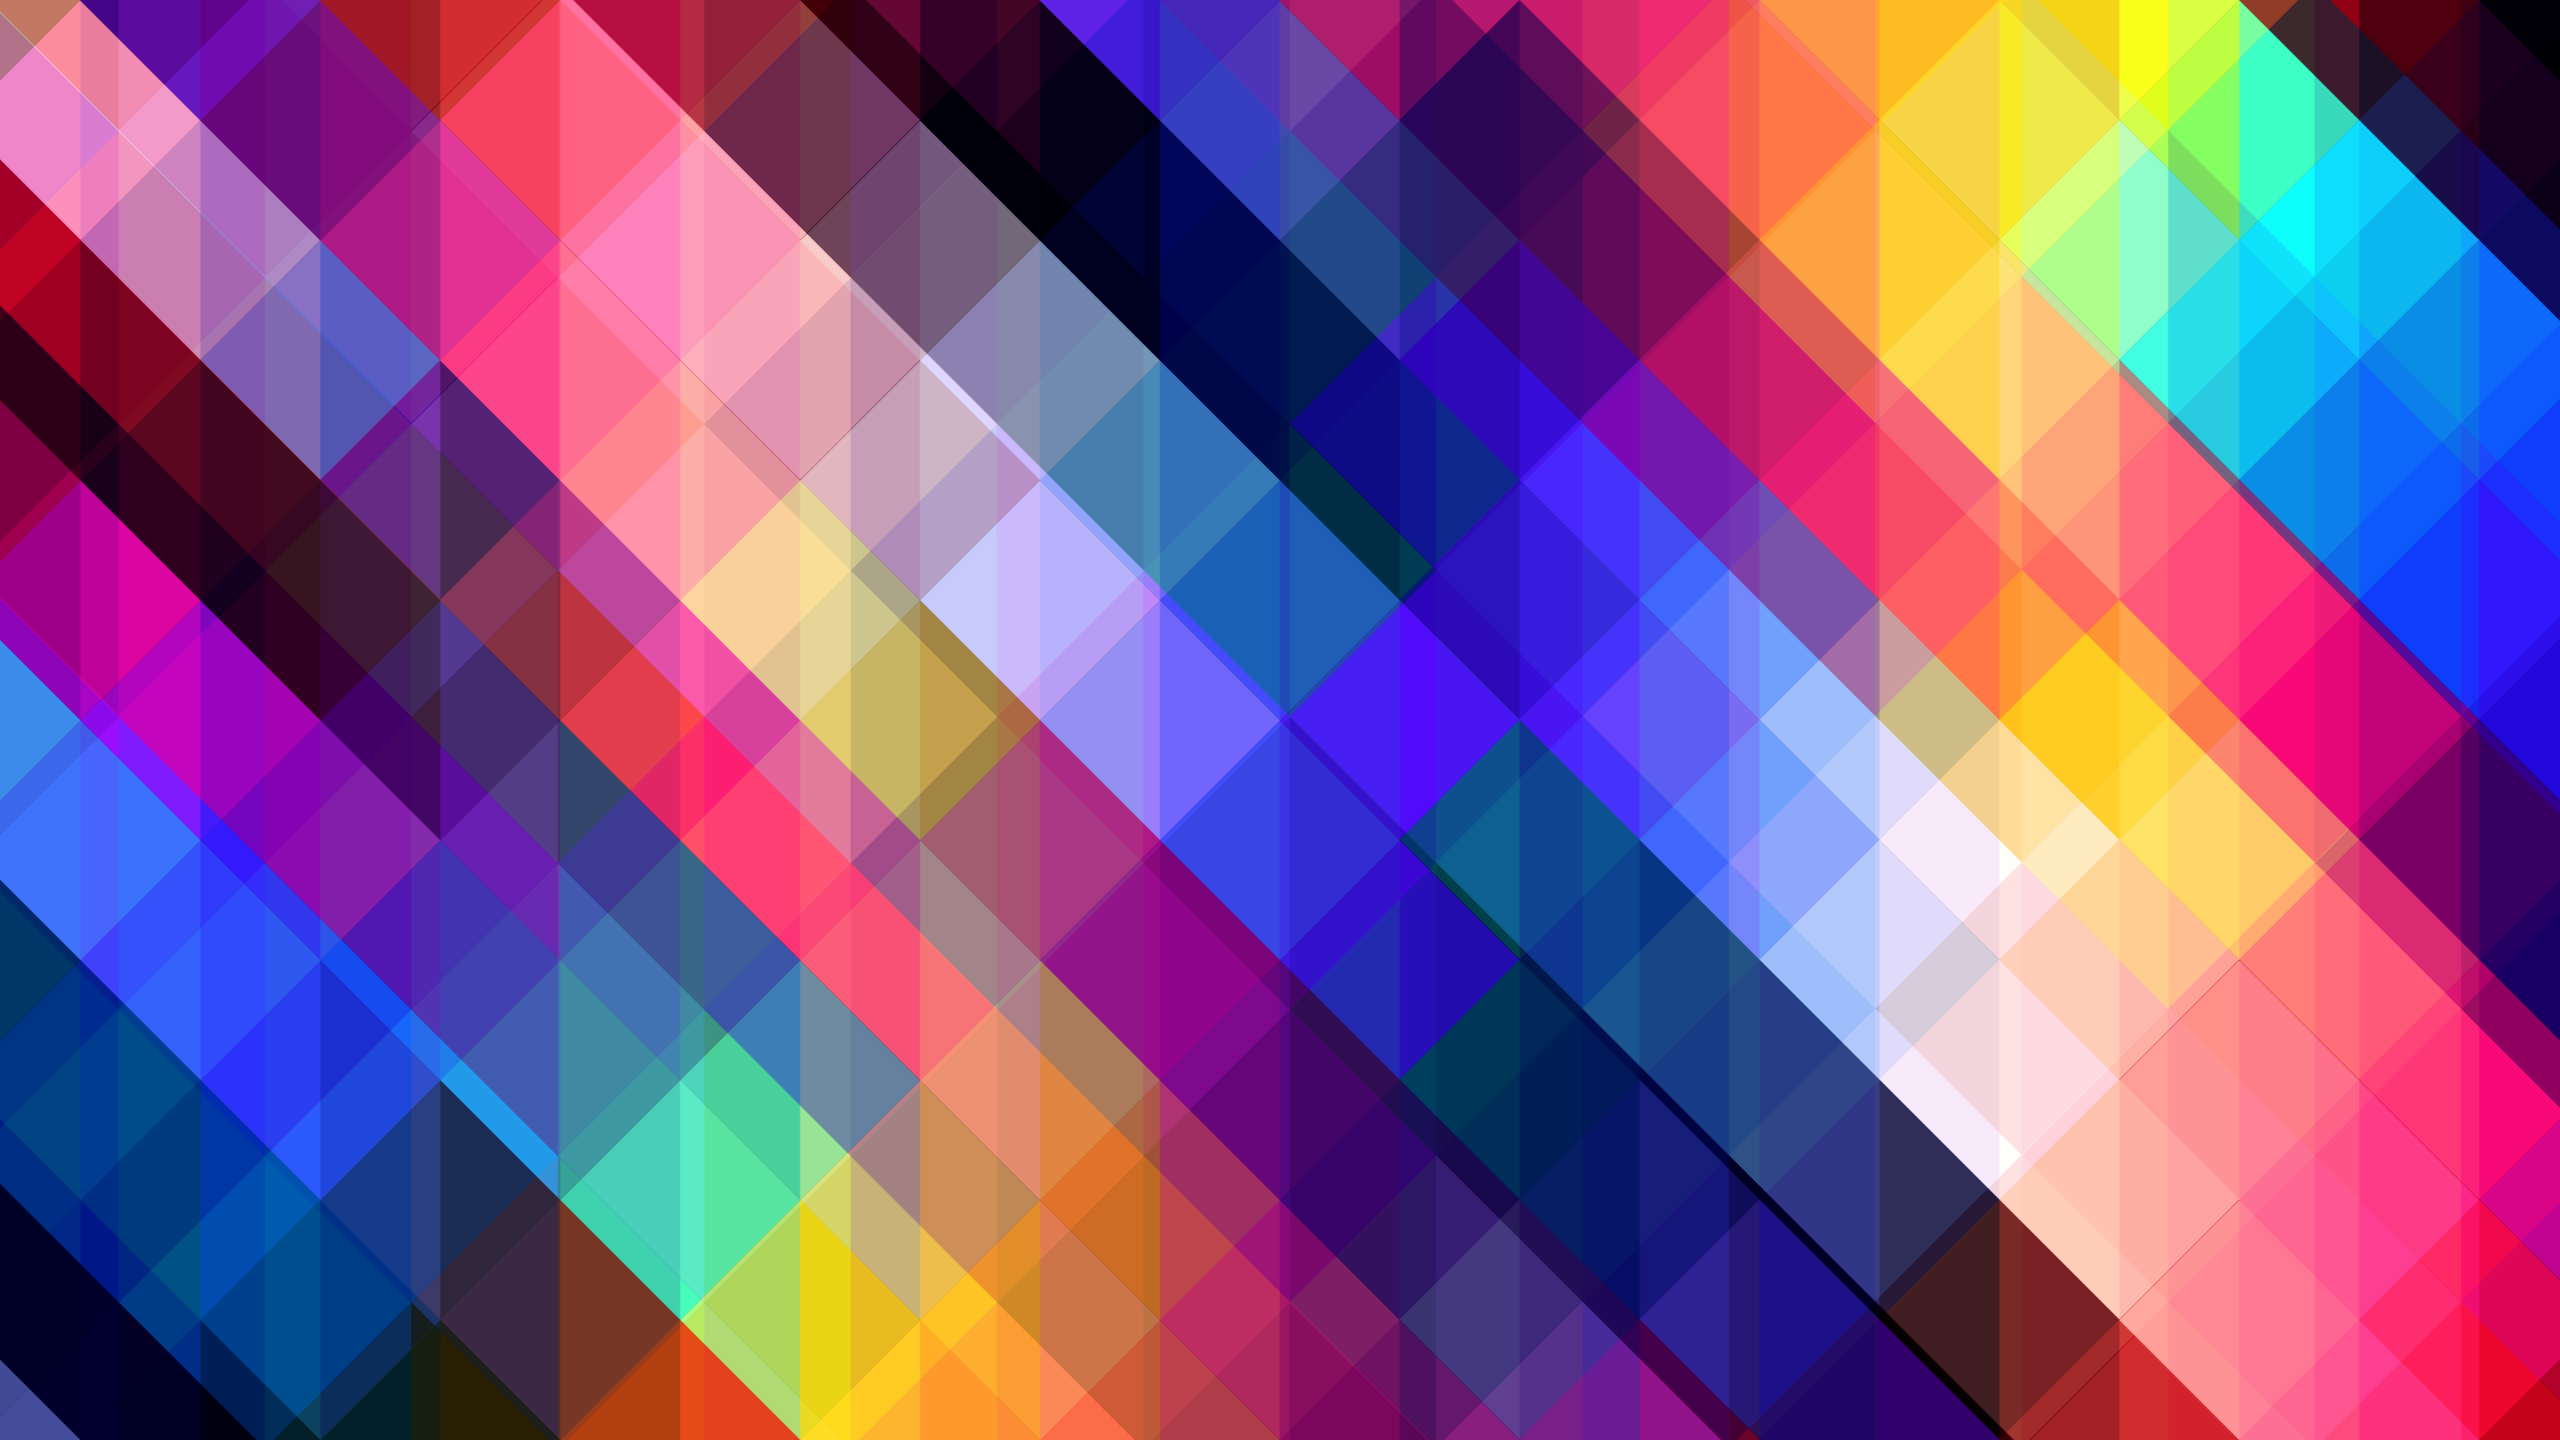 Abstract Pattern Colorful 2560x1440